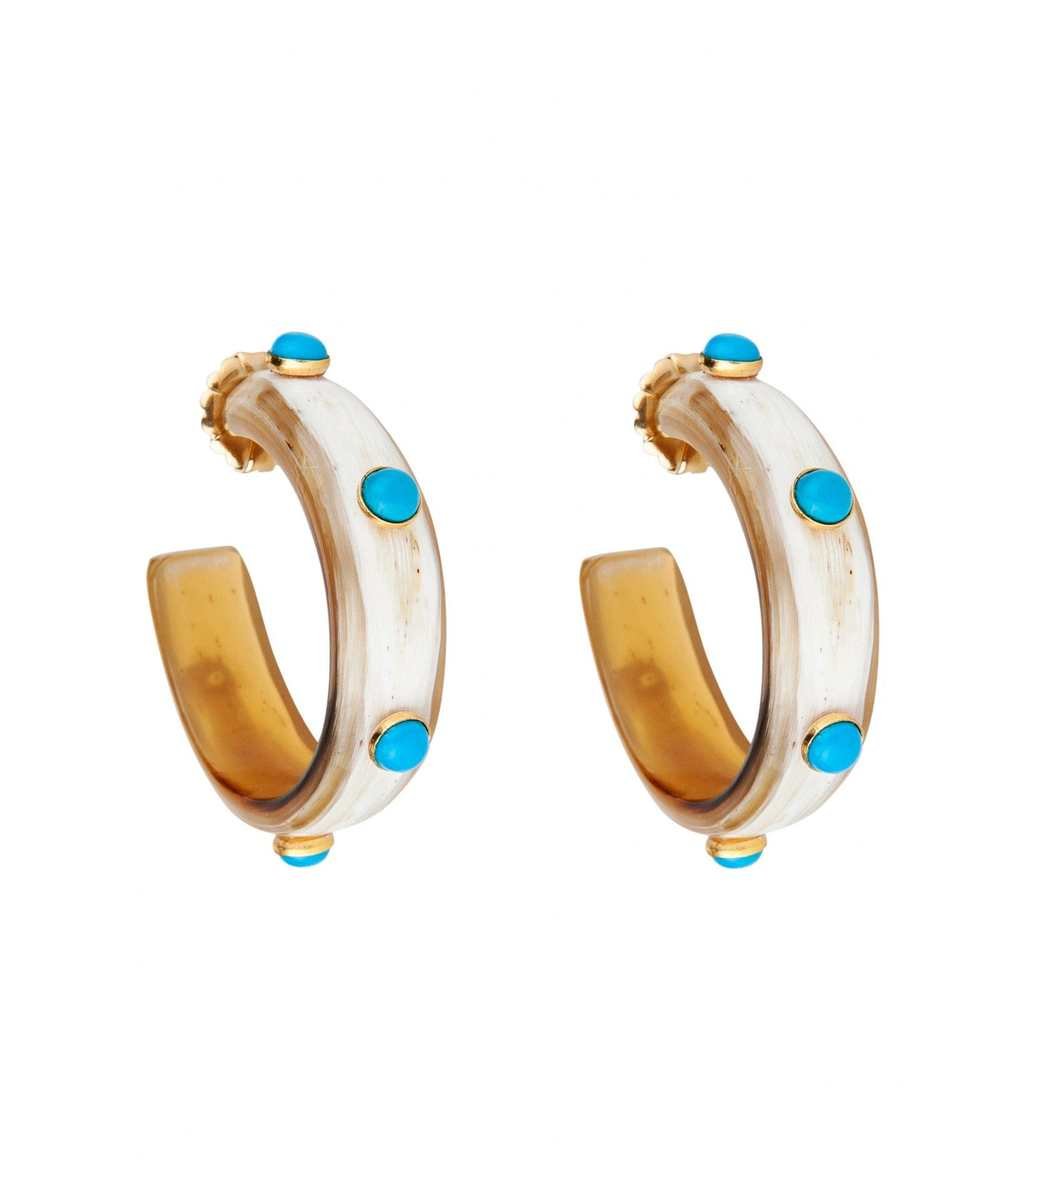 bounkit-jewelry-jewelryboutiqueearring-white-turquoise-horn-hoops-39893861269656__IMG_1050_1200--TurquoiseHornHoops--1200814503.jpg